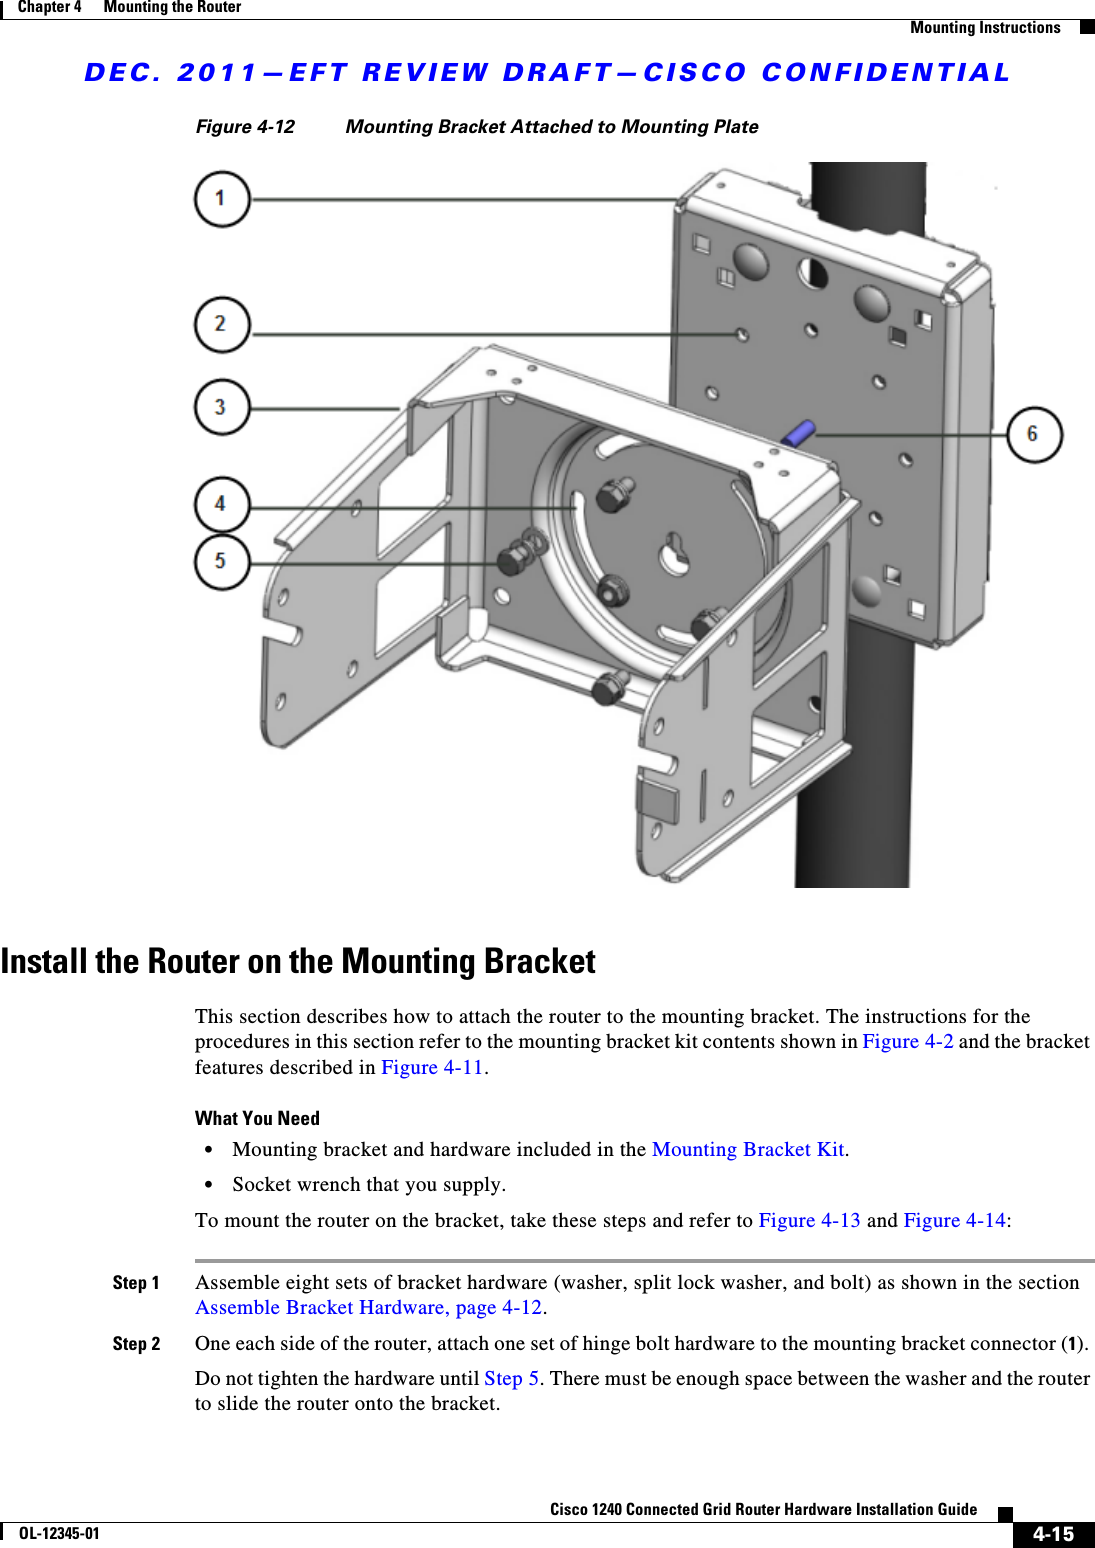 DEC. 2011—EFT REVIEW DRAFT—CISCO CONFIDENTIAL4-15Cisco 1240 Connected Grid Router Hardware Installation GuideOL-12345-01Chapter 4      Mounting the Router  Mounting InstructionsFigure 4-12 Mounting Bracket Attached to Mounting PlateInstall the Router on the Mounting BracketThis section describes how to attach the router to the mounting bracket. The instructions for the procedures in this section refer to the mounting bracket kit contents shown in Figure 4-2 and the bracket features described in Figure 4-11.What You Need  • Mounting bracket and hardware included in the Mounting Bracket Kit.  • Socket wrench that you supply.To mount the router on the bracket, take these steps and refer to Figure 4-13 and Figure 4-14:Step 1 Assemble eight sets of bracket hardware (washer, split lock washer, and bolt) as shown in the section Assemble Bracket Hardware, page 4-12.Step 2 One each side of the router, attach one set of hinge bolt hardware to the mounting bracket connector (1). Do not tighten the hardware until Step 5. There must be enough space between the washer and the router to slide the router onto the bracket.